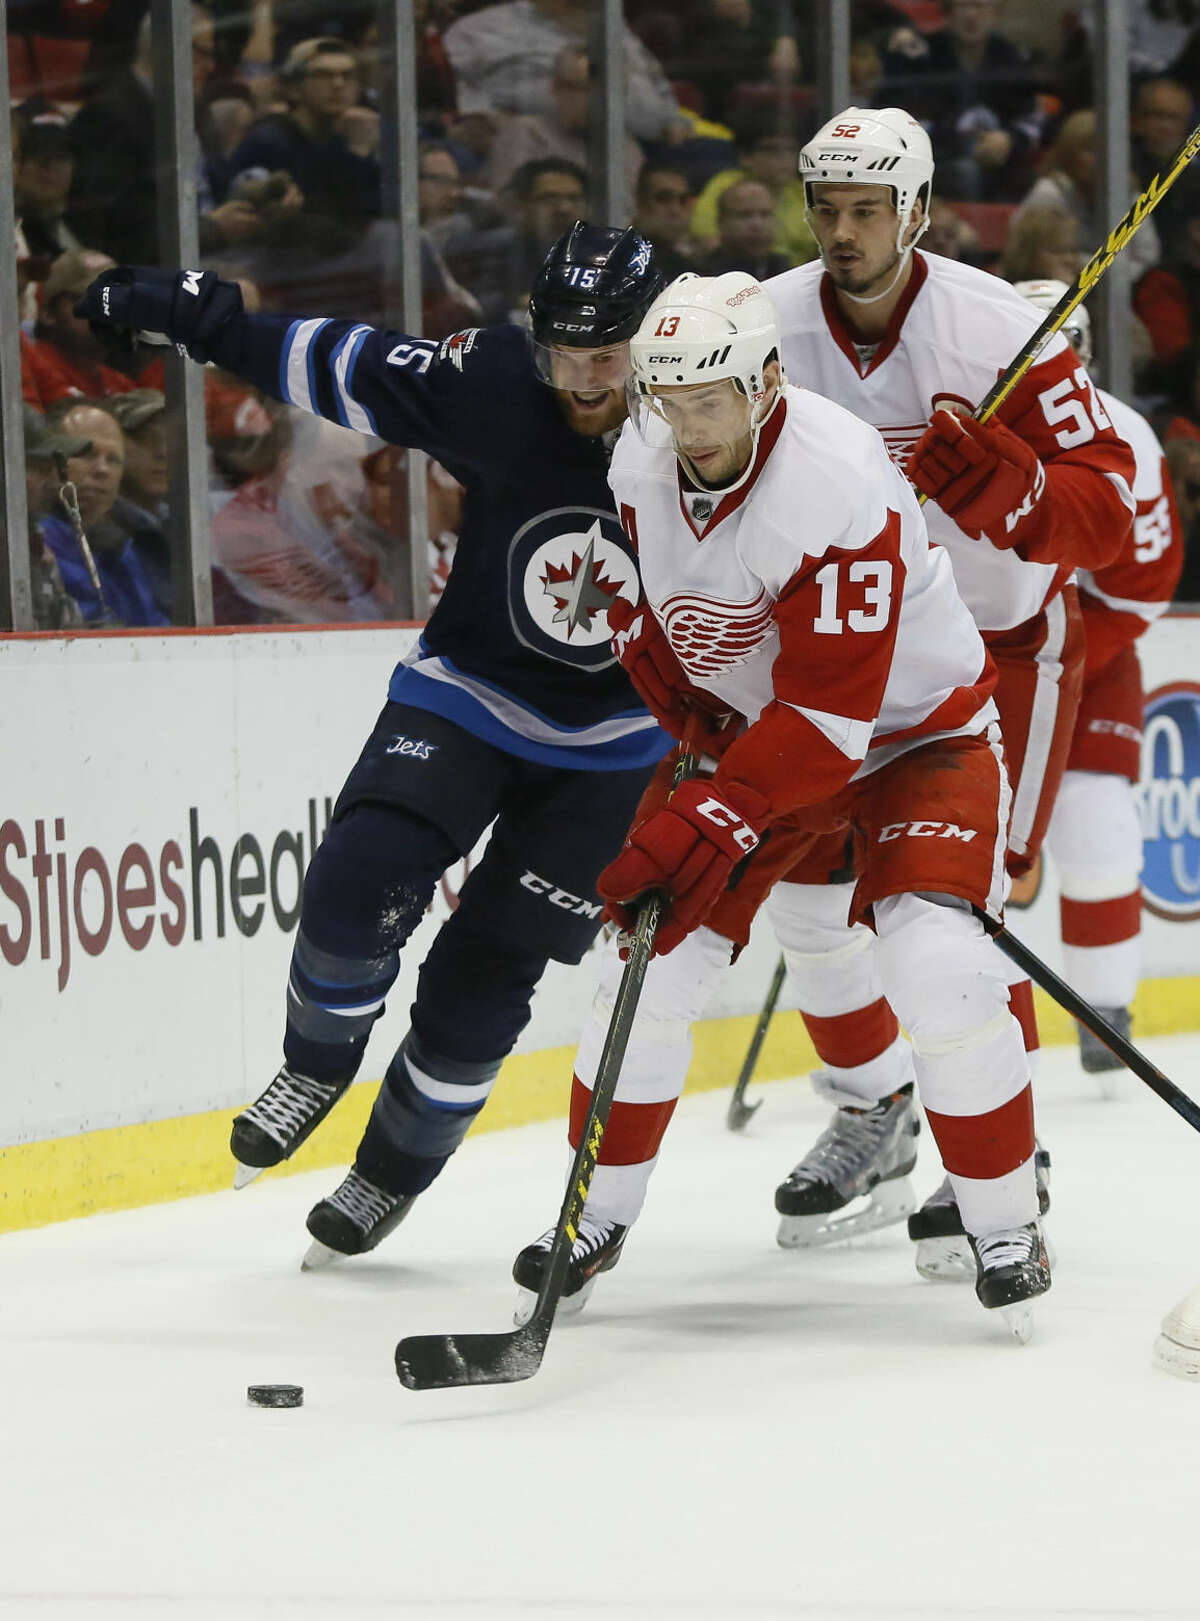 Detroit Red Wings' Pavel Datsyuk (13), of Russia, is pursued by Winnipeg Jets' Matt Halischuk (15) as Detroit Red Wings' Jonathan Ericsson (52), of Sweden, follows during the first period of an NHL hockey game Thursday, March 10, 2016, in Detroit. (AP Photo/Duane Burleson)